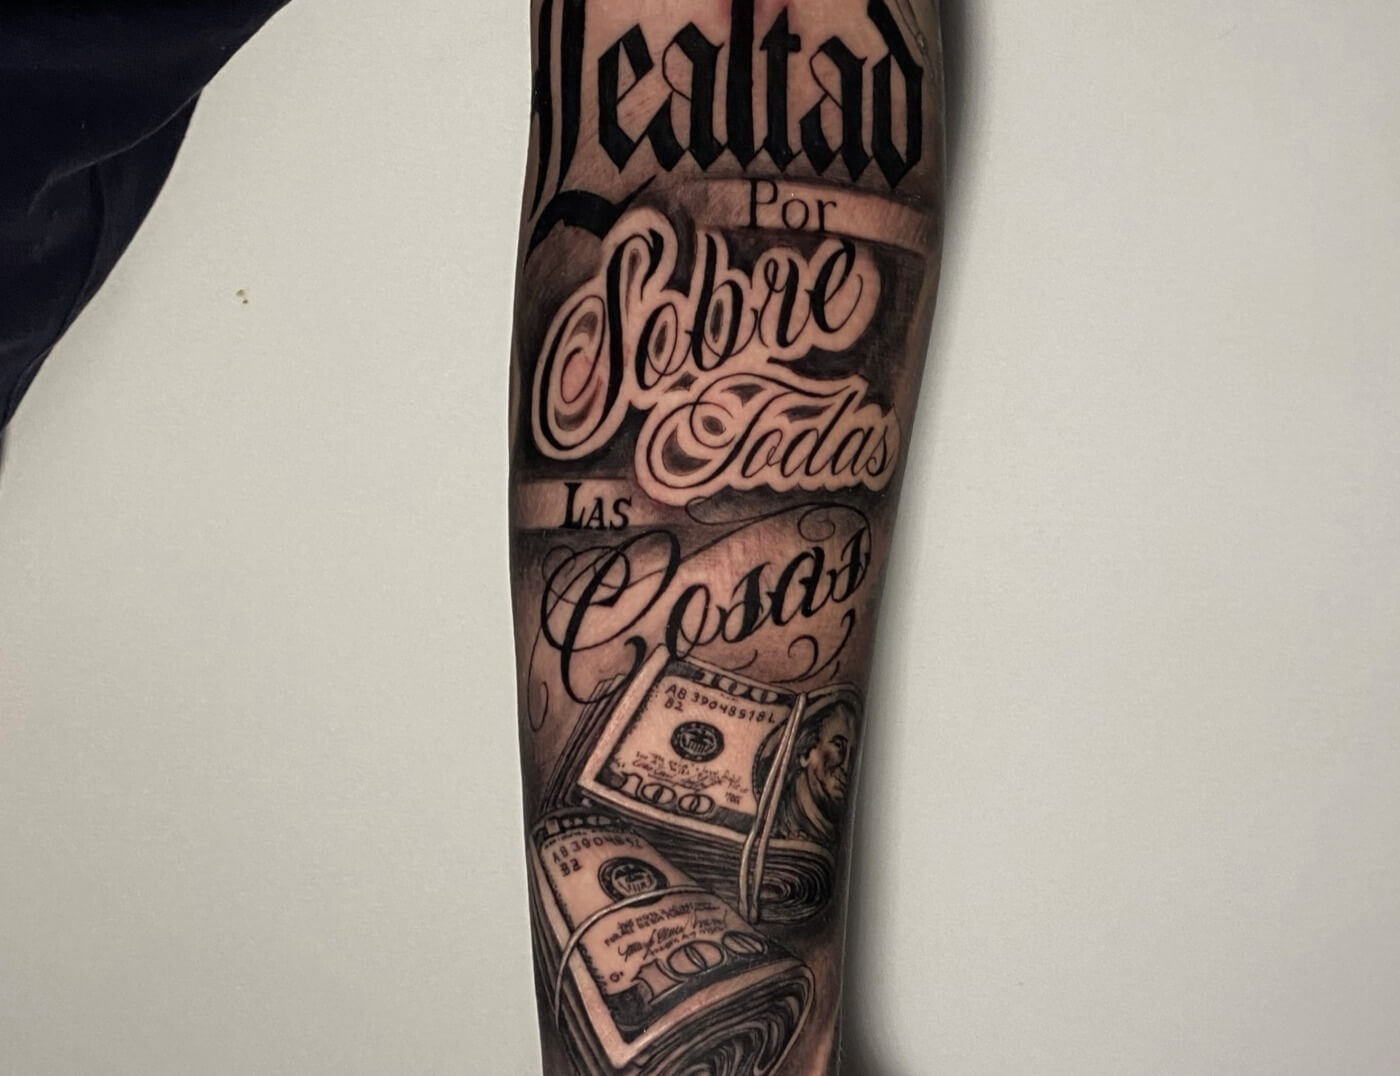 'Leltad Por Sobre Todas Cosas' (Loyalty Above All things) Black Work Lettering Tattoo By Rene Cristobal, A Guest artist at Iron Palm Tattoos in downtown Atlanta, Georgia. Originally from Vision Tattoo Studio in Concepcion, Chile, Rene will be at Iron Palm from July 3rd through July 16th. We're open late night most nights until 2AM. Walk ins are welcome. Call 404-973-7828.